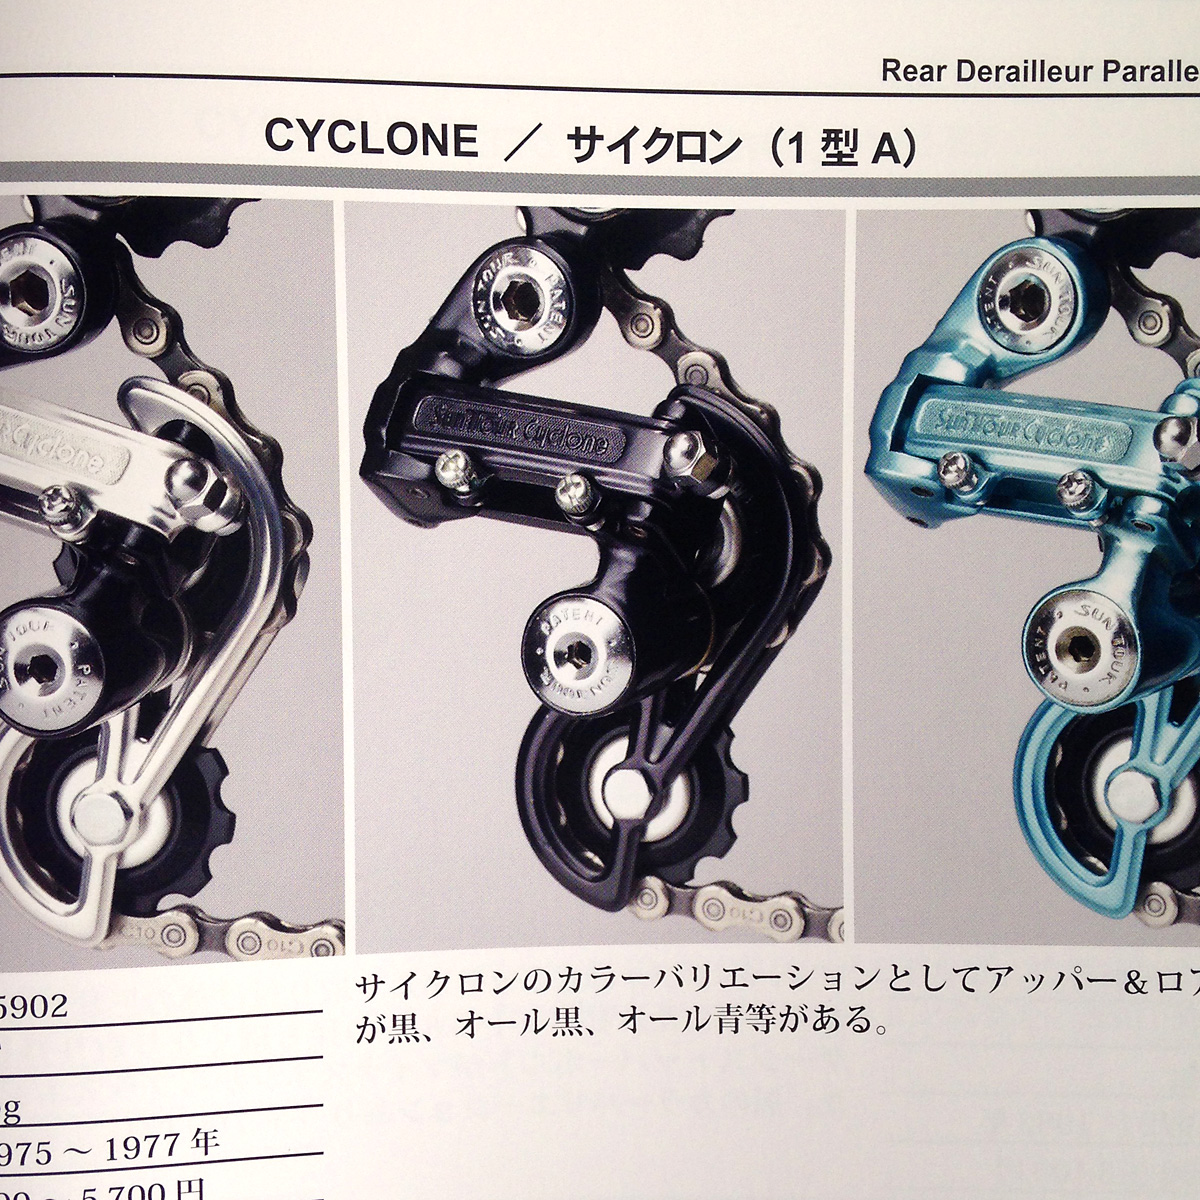 The Suntour cyclone rear derailleur was available in different colors